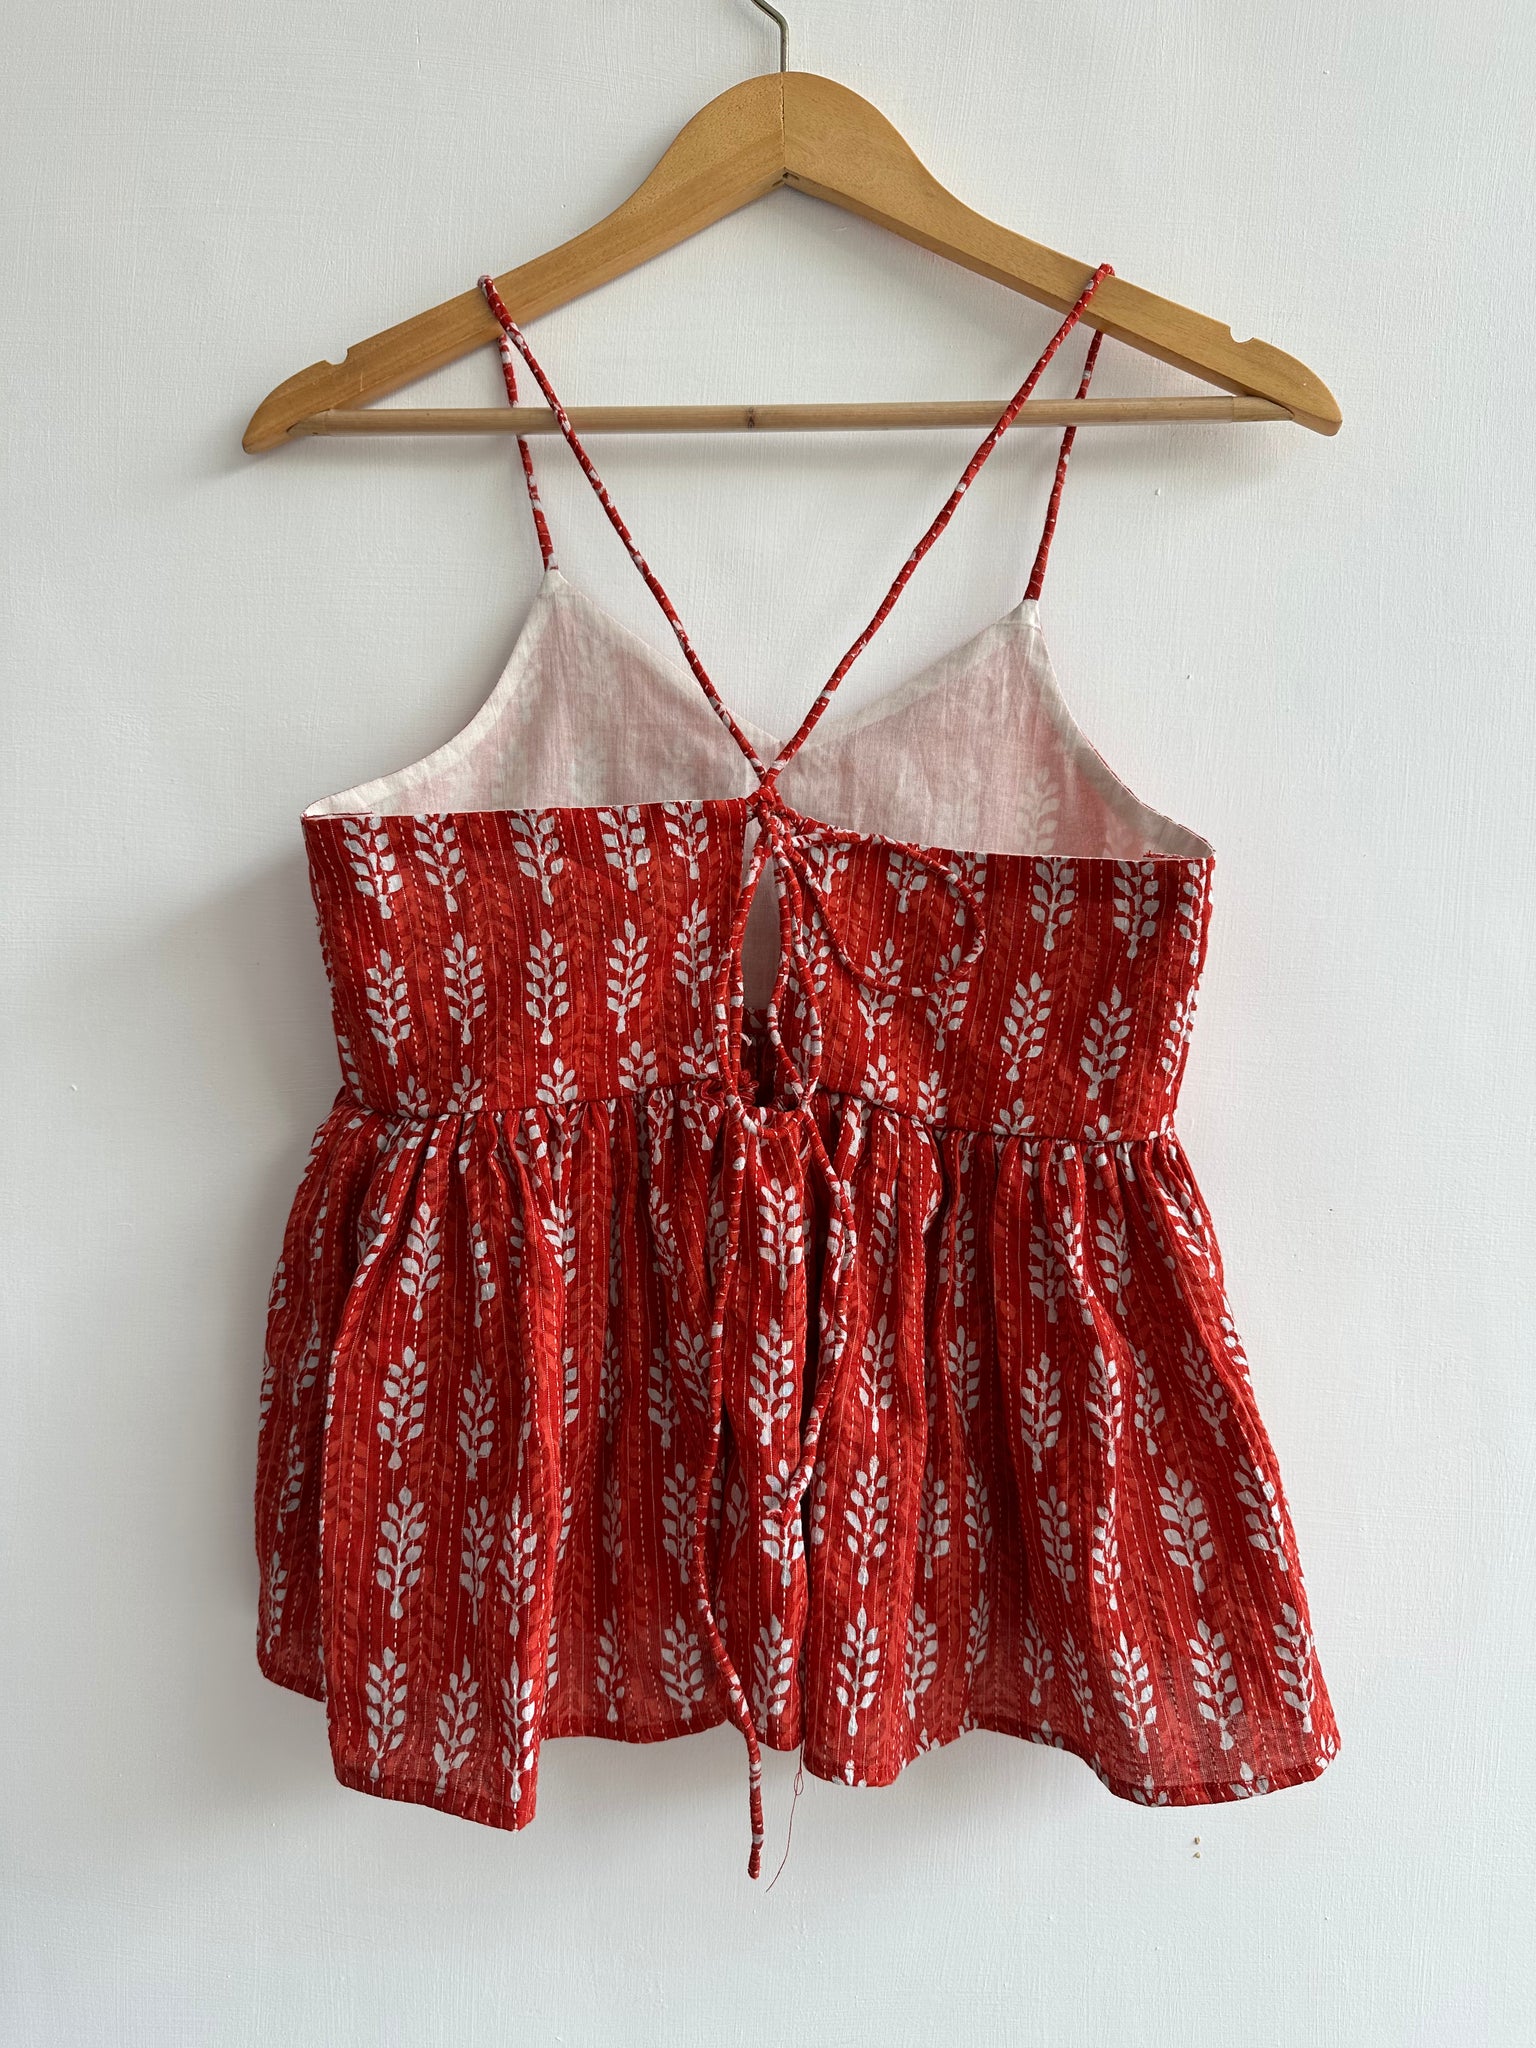 Noodle Strap Top (Kantha fabric)